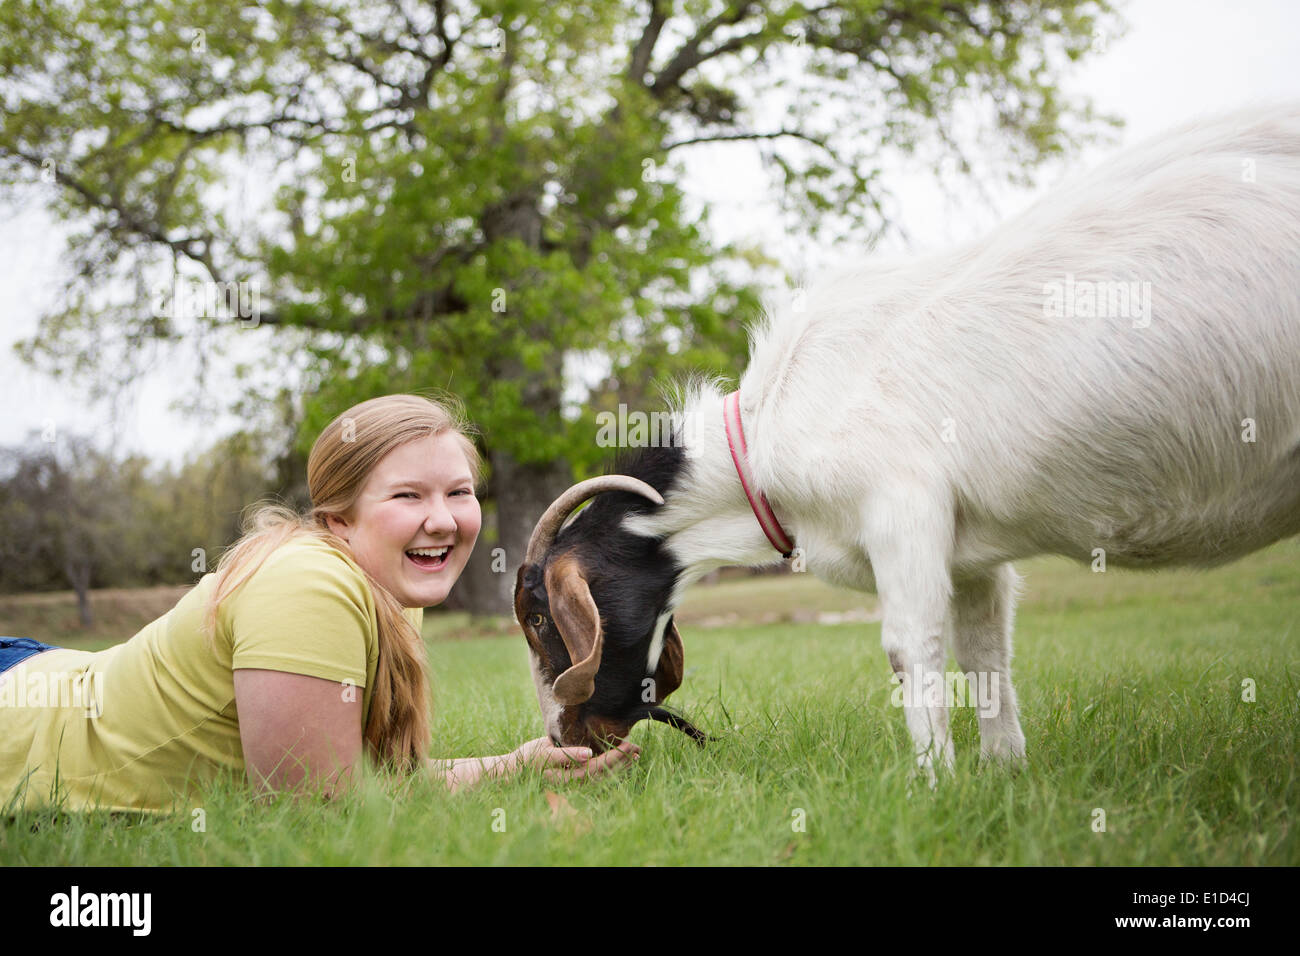 A girl lying on grass head to head with a goat. Stock Photo